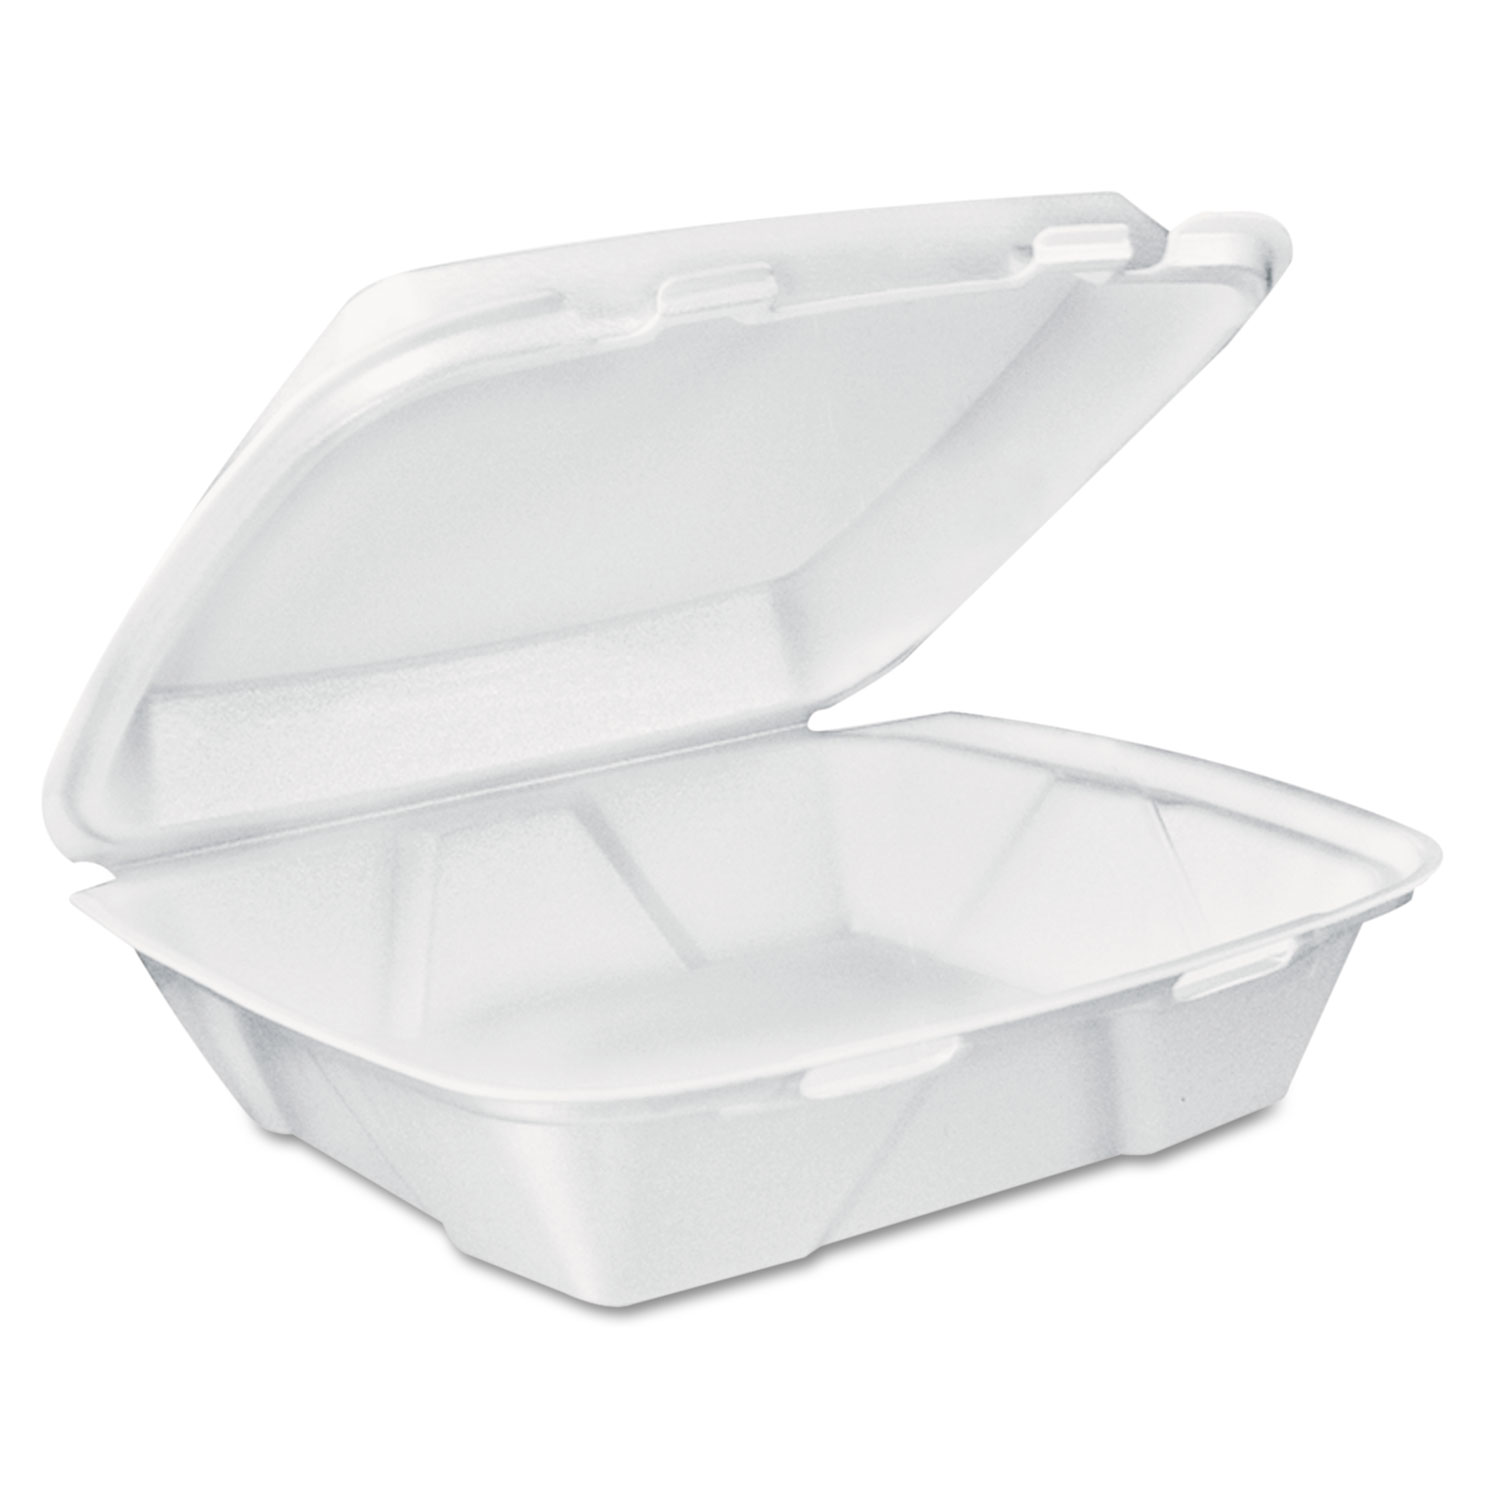  Dart DT1R Carryout Food Containers, White, Foam, 7 4/5 x 8 1/2 x 2 1/2, 200/Carton (DCCDT1R) 